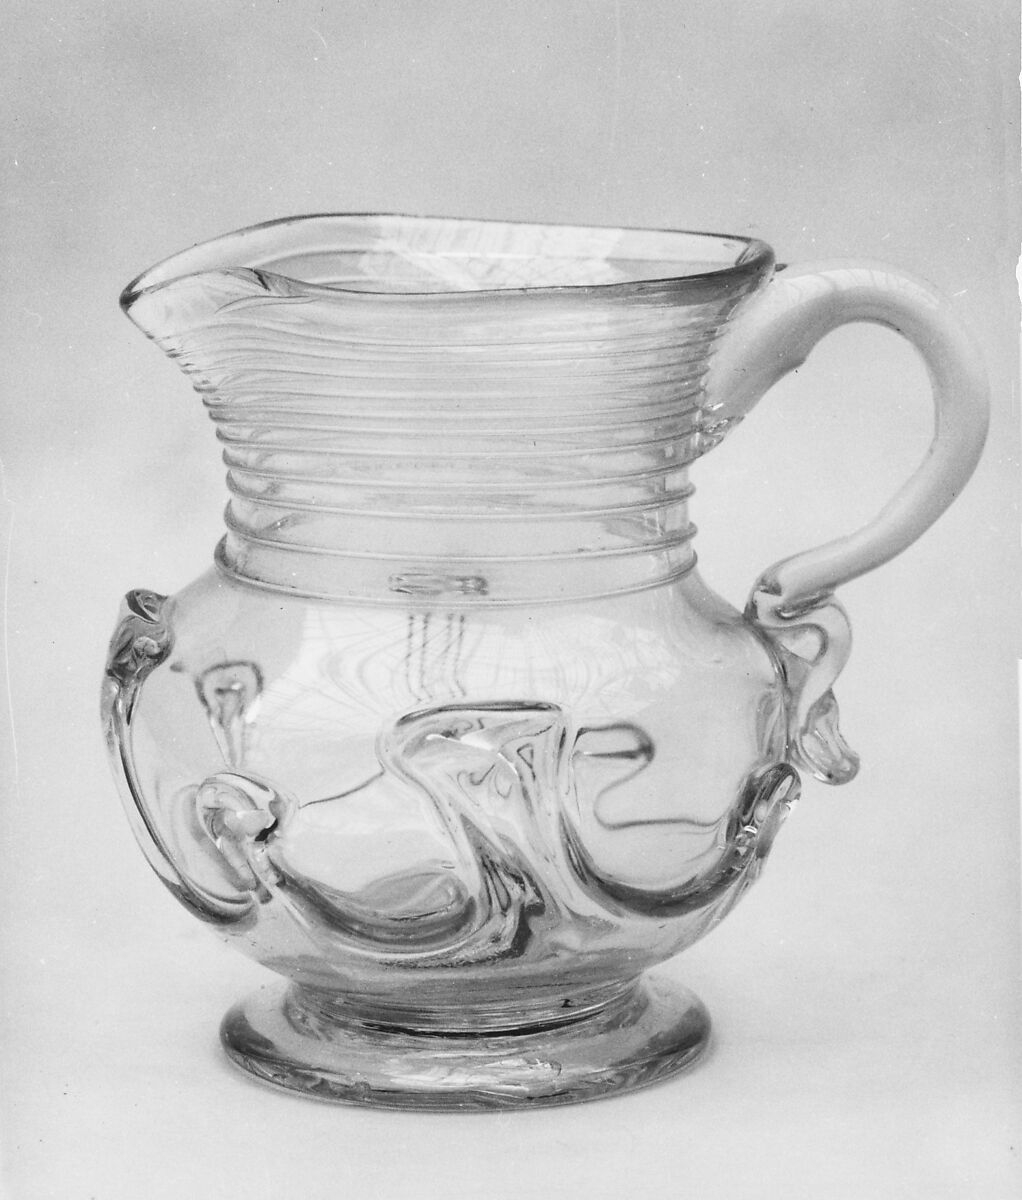 Pitcher, Designed by Charles A. Cornwall, Blown aquamarine glass with applied decoration, American 